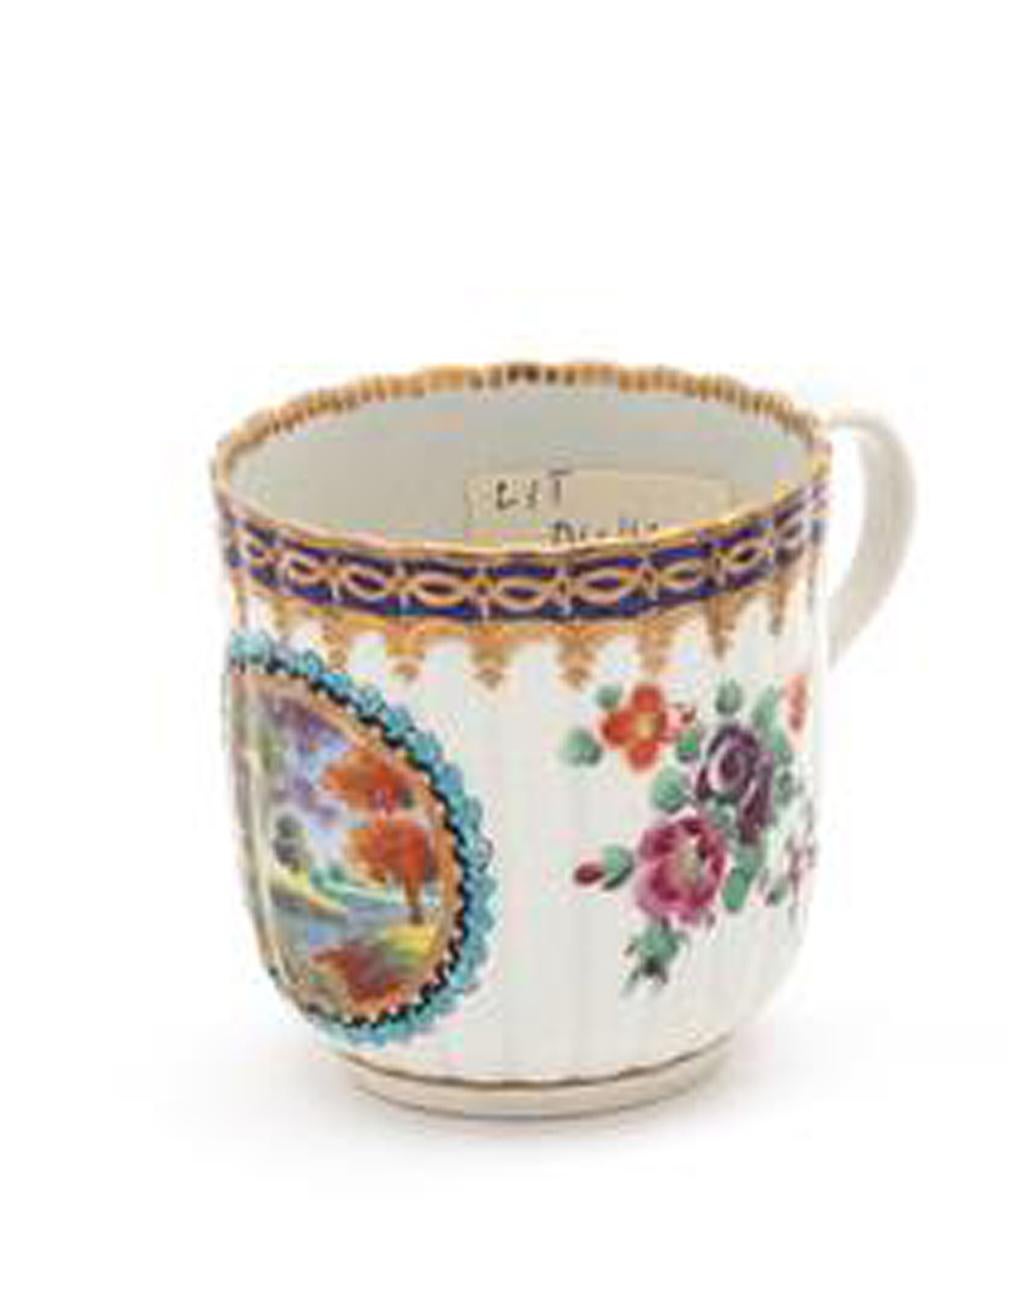 First Period Worcester porcelain coffee can and saucer,
circa 1772-1775

The fluted Worcester porcelain coffee can and saucer are finely painted with a central reserve with a landscape scene with a flower and butterfly design surround. The border